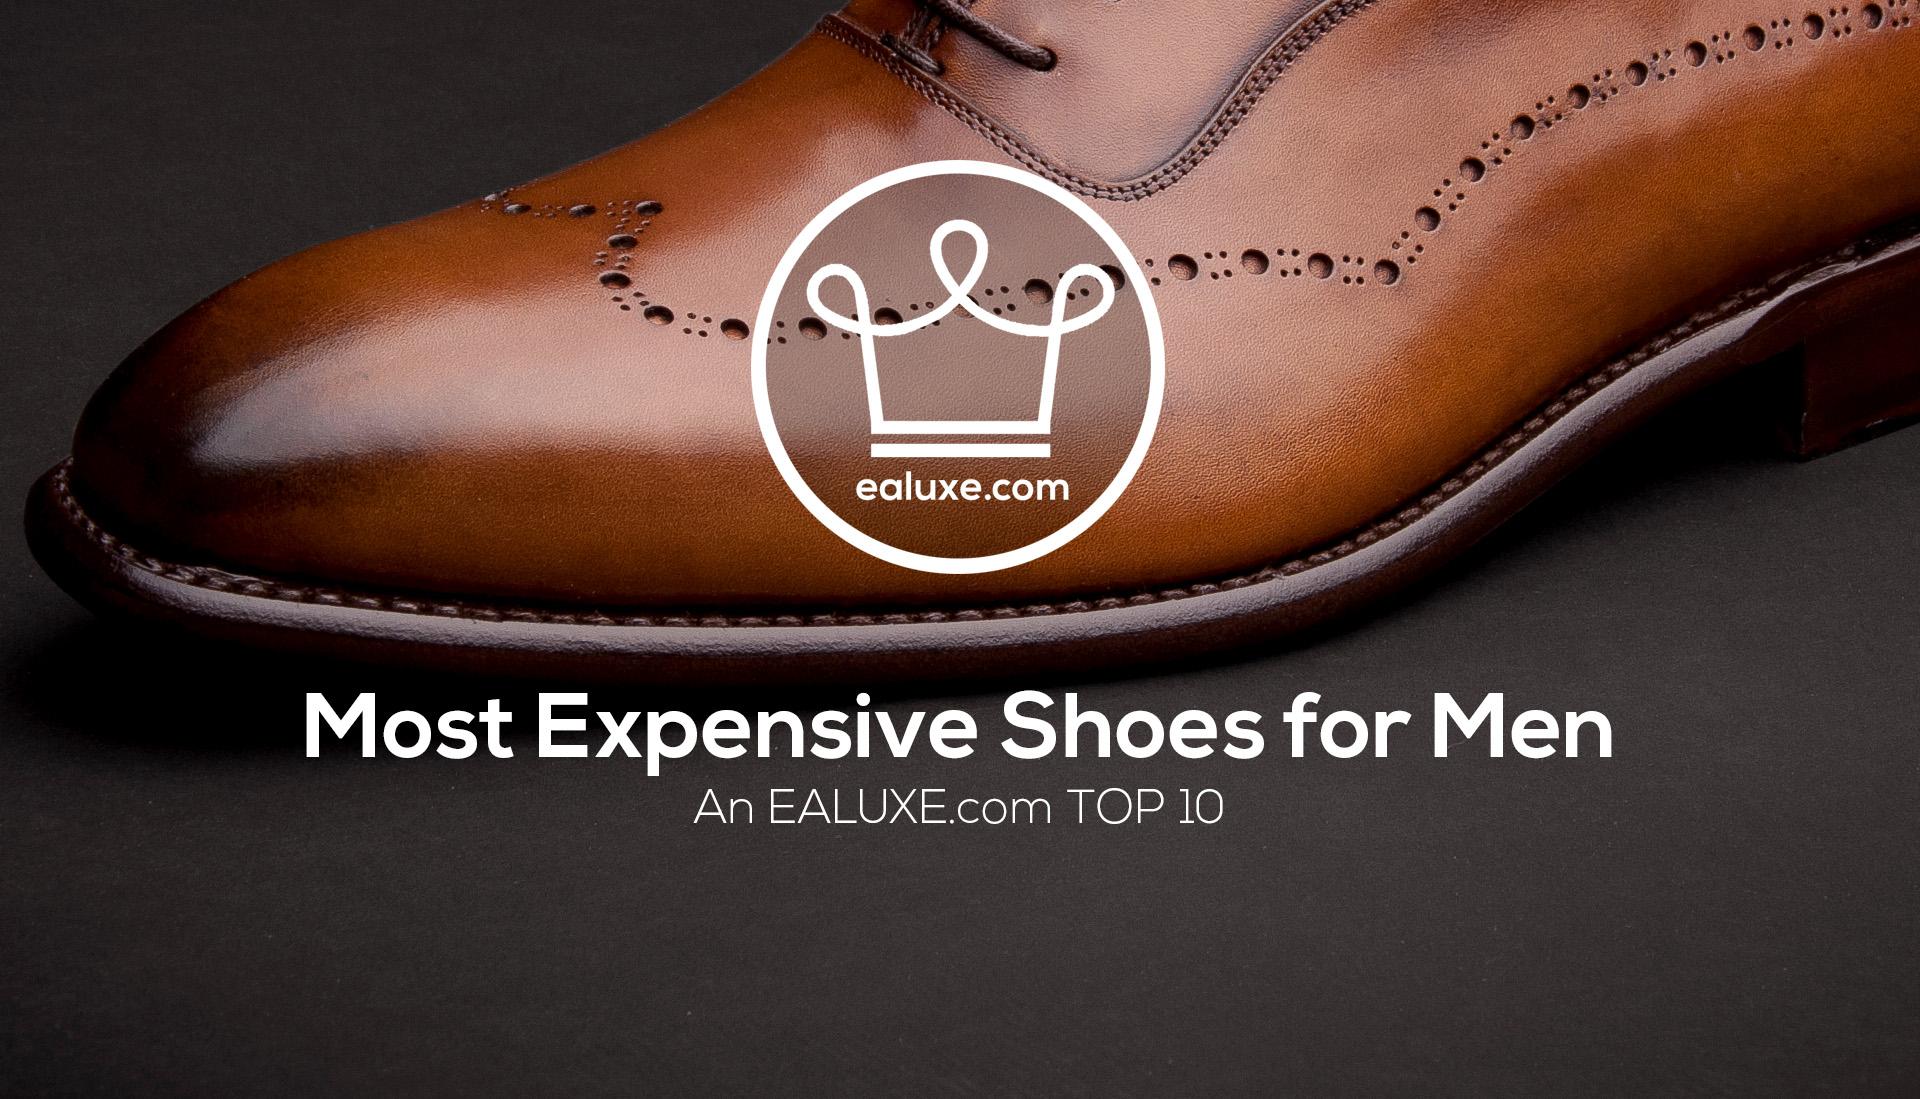 Expensive Shoe Logo - Top 10 Most Expensive Shoes For Men